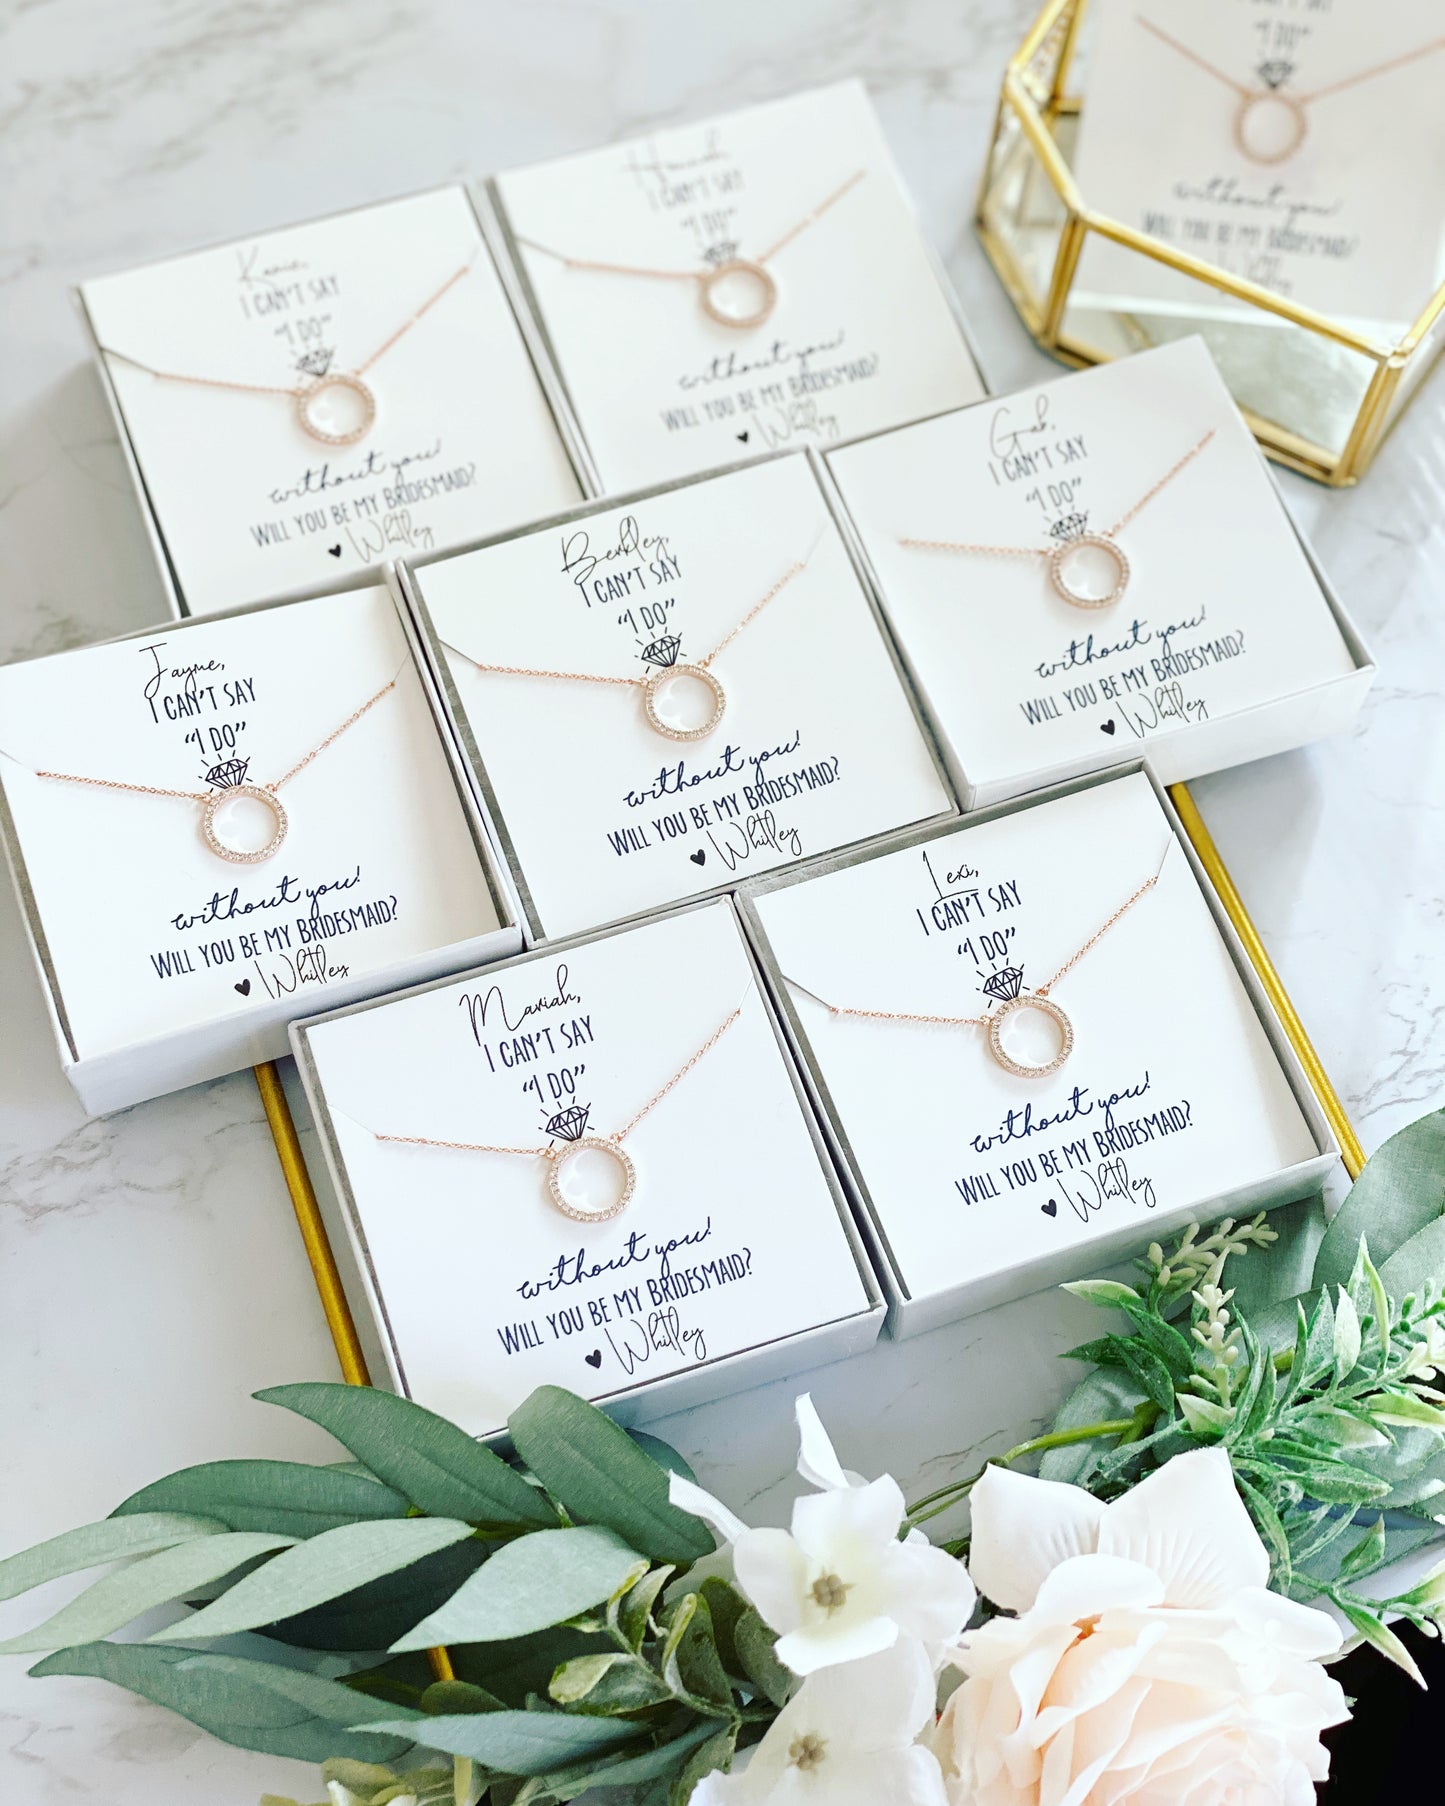 Bridesmaid Can't Say "I do" Without You! Circle Pendant Necklace